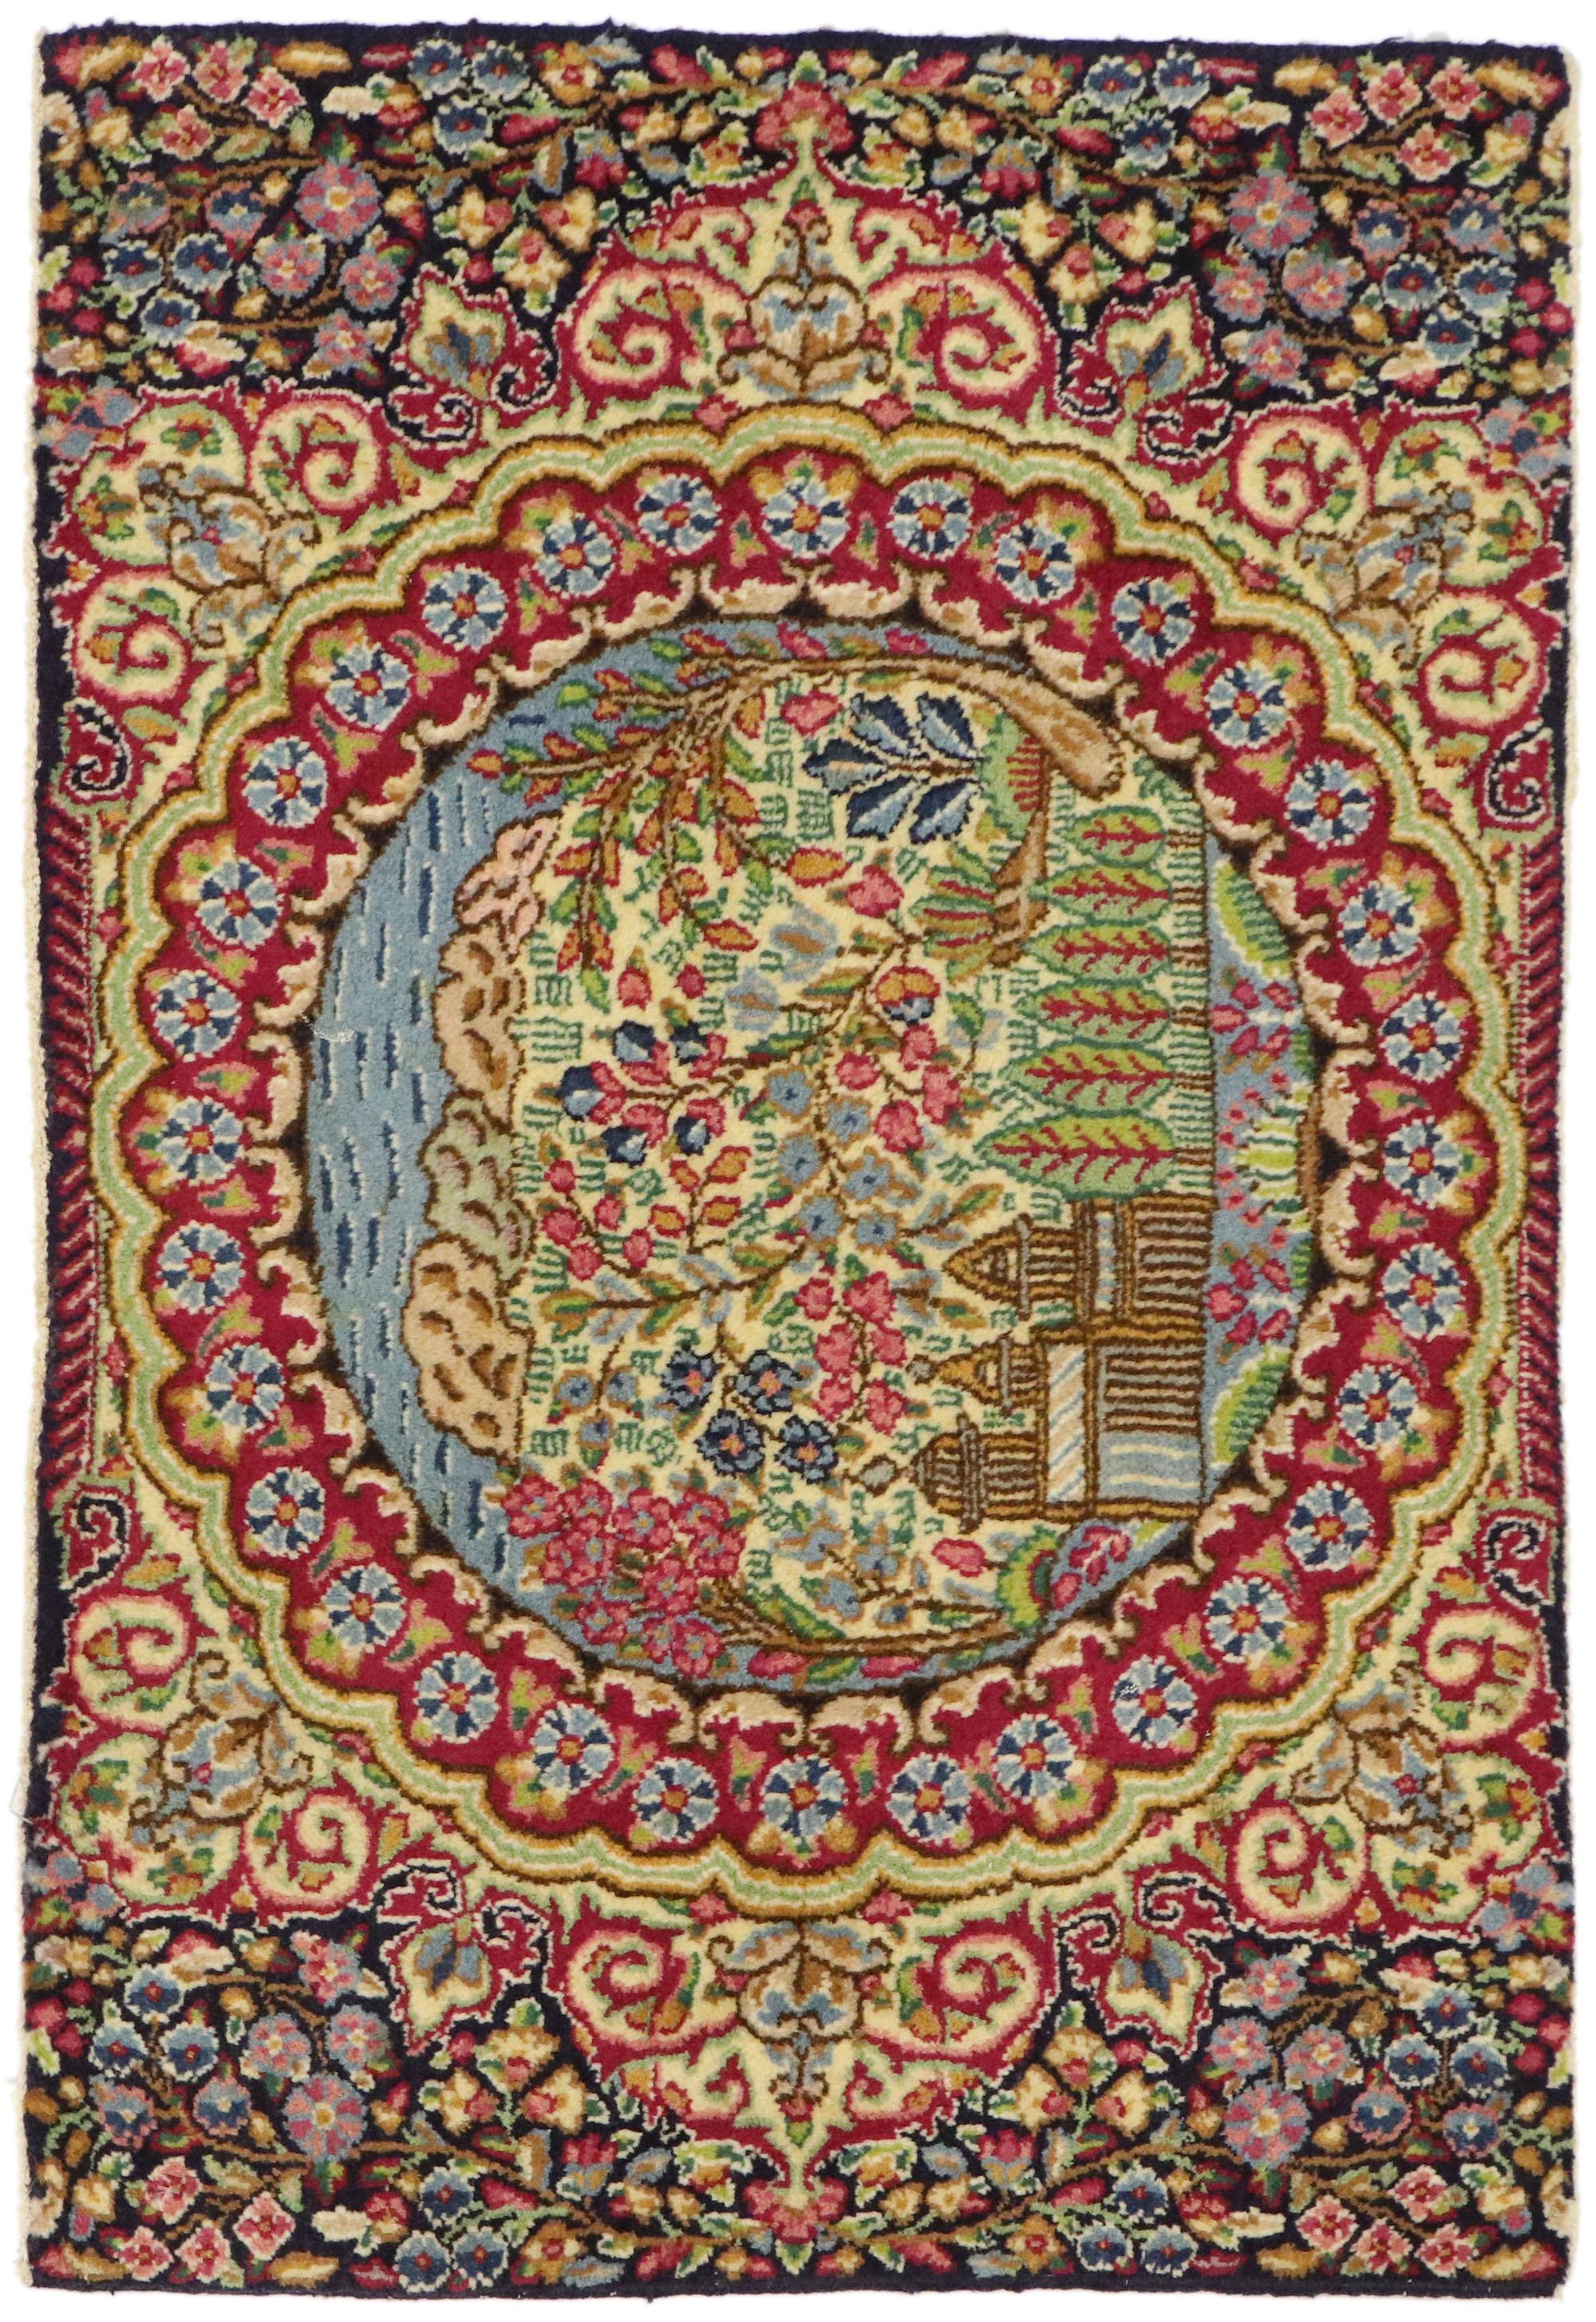 75814 Vintage Persian Kerman Pictorial rug 02'00 x 02'04. With a timeless design and effortless beauty, this hand knotted wool vintage Kerman rug is a captivating vision of woven beauty. The abrashed field features a beautiful pictorial scene